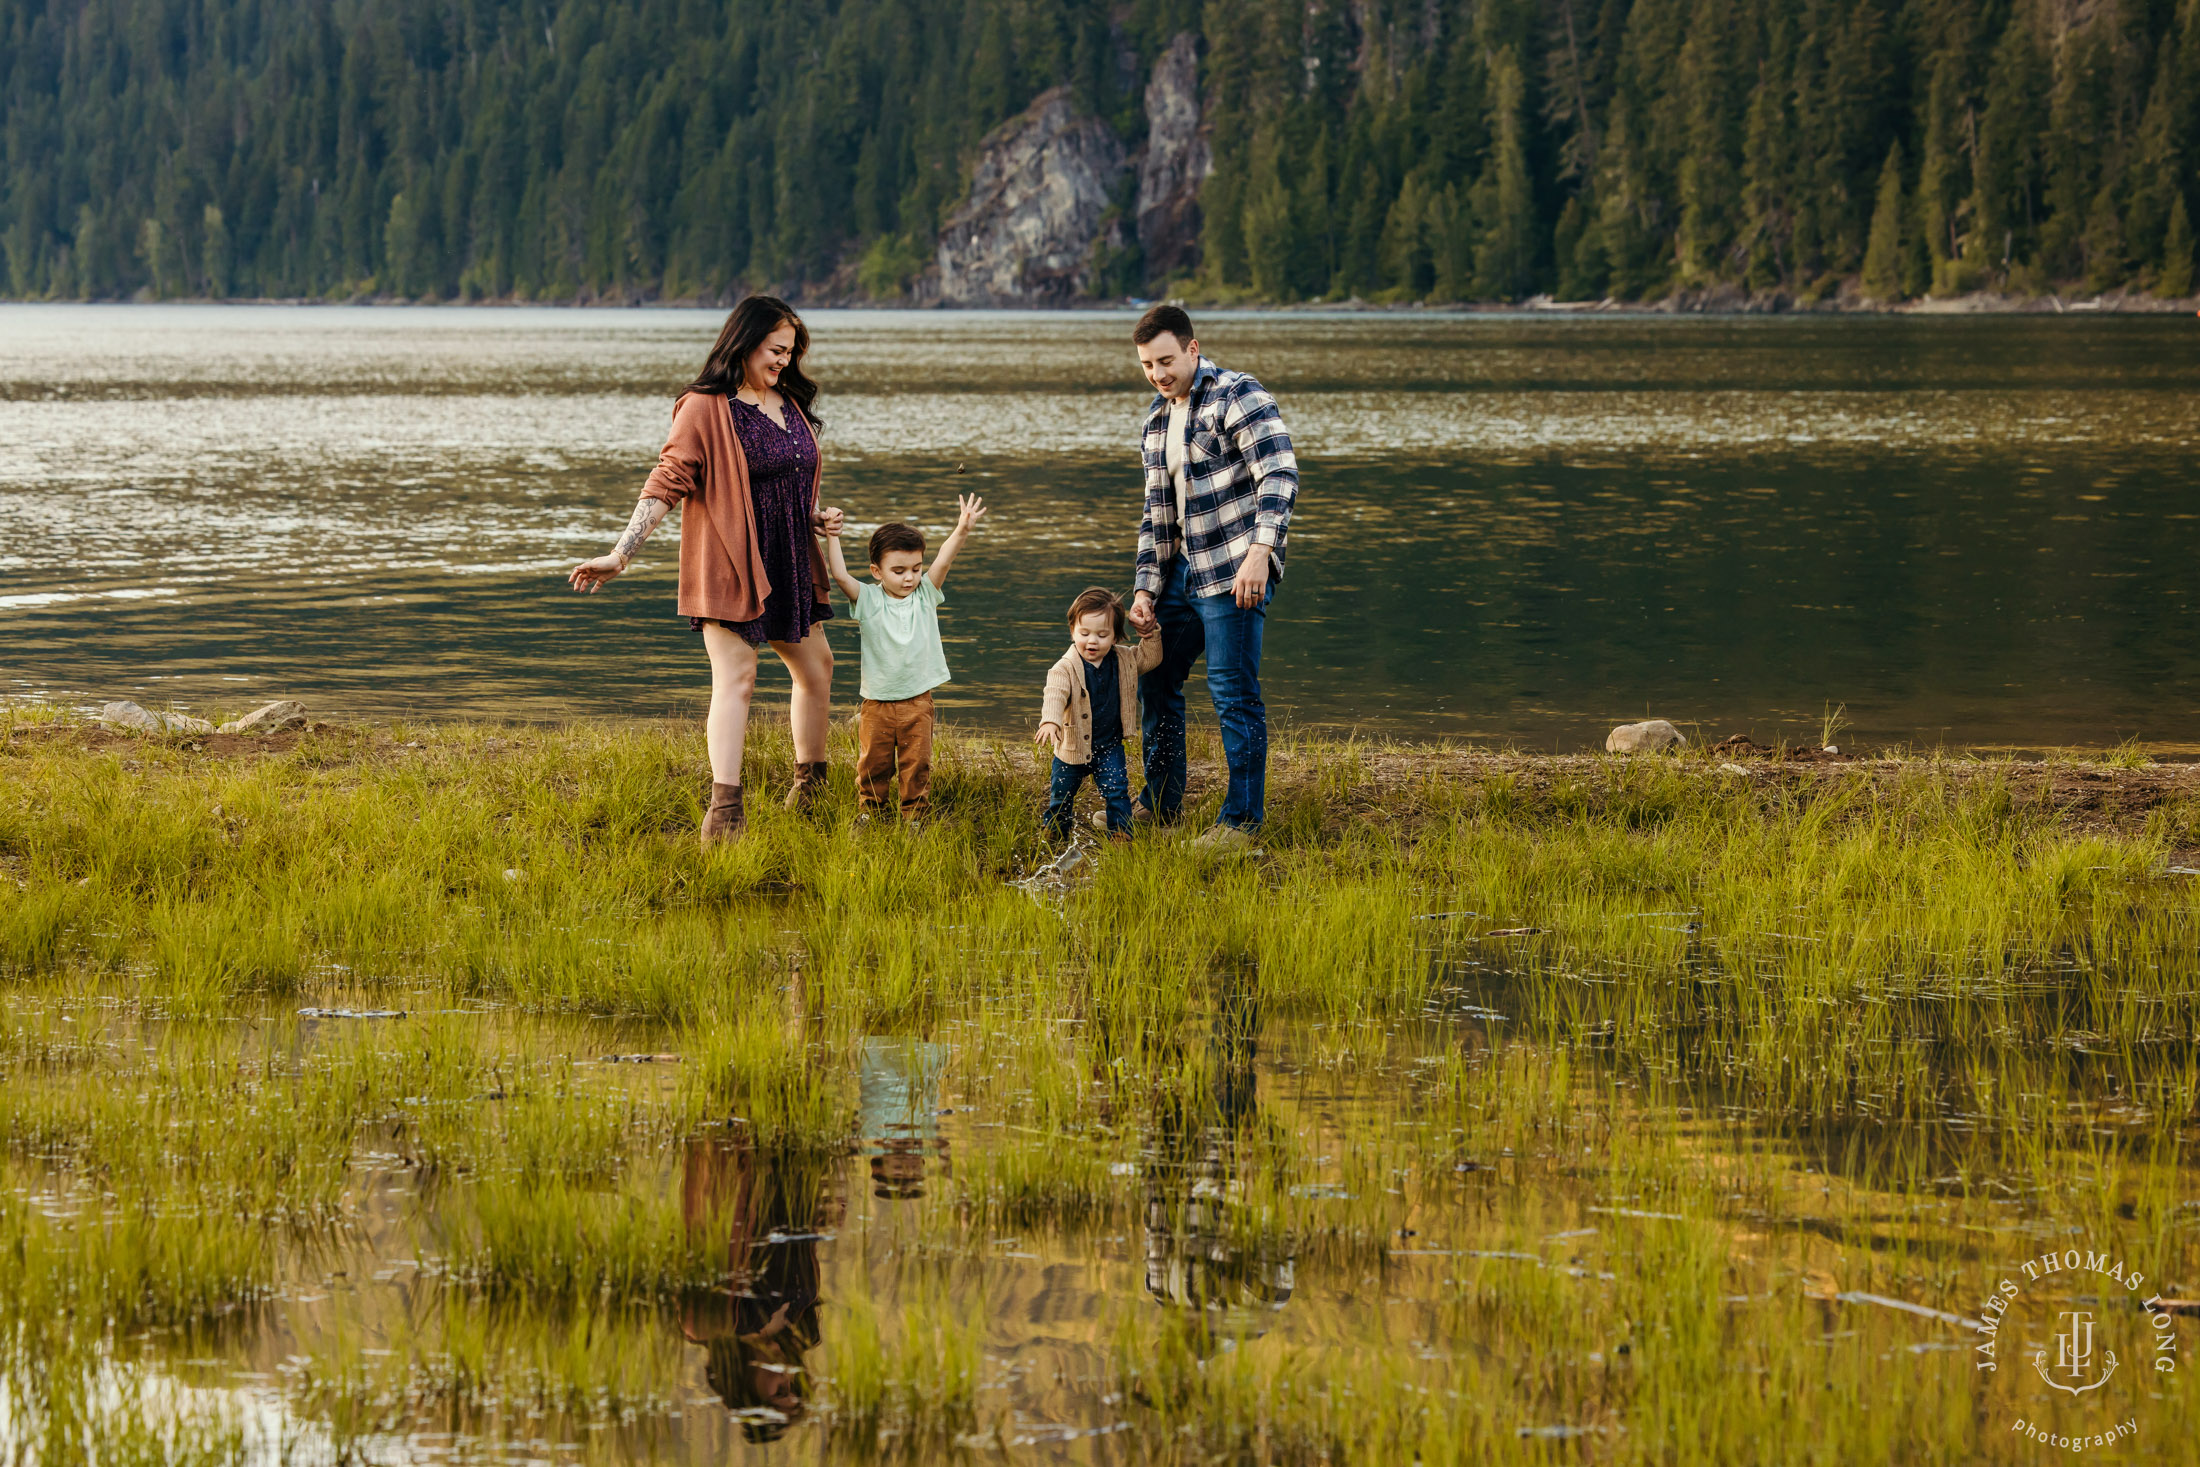 Snoqualmie adventure family photography session by Snoqualmie adventure family photographer James Thomas Long Photography